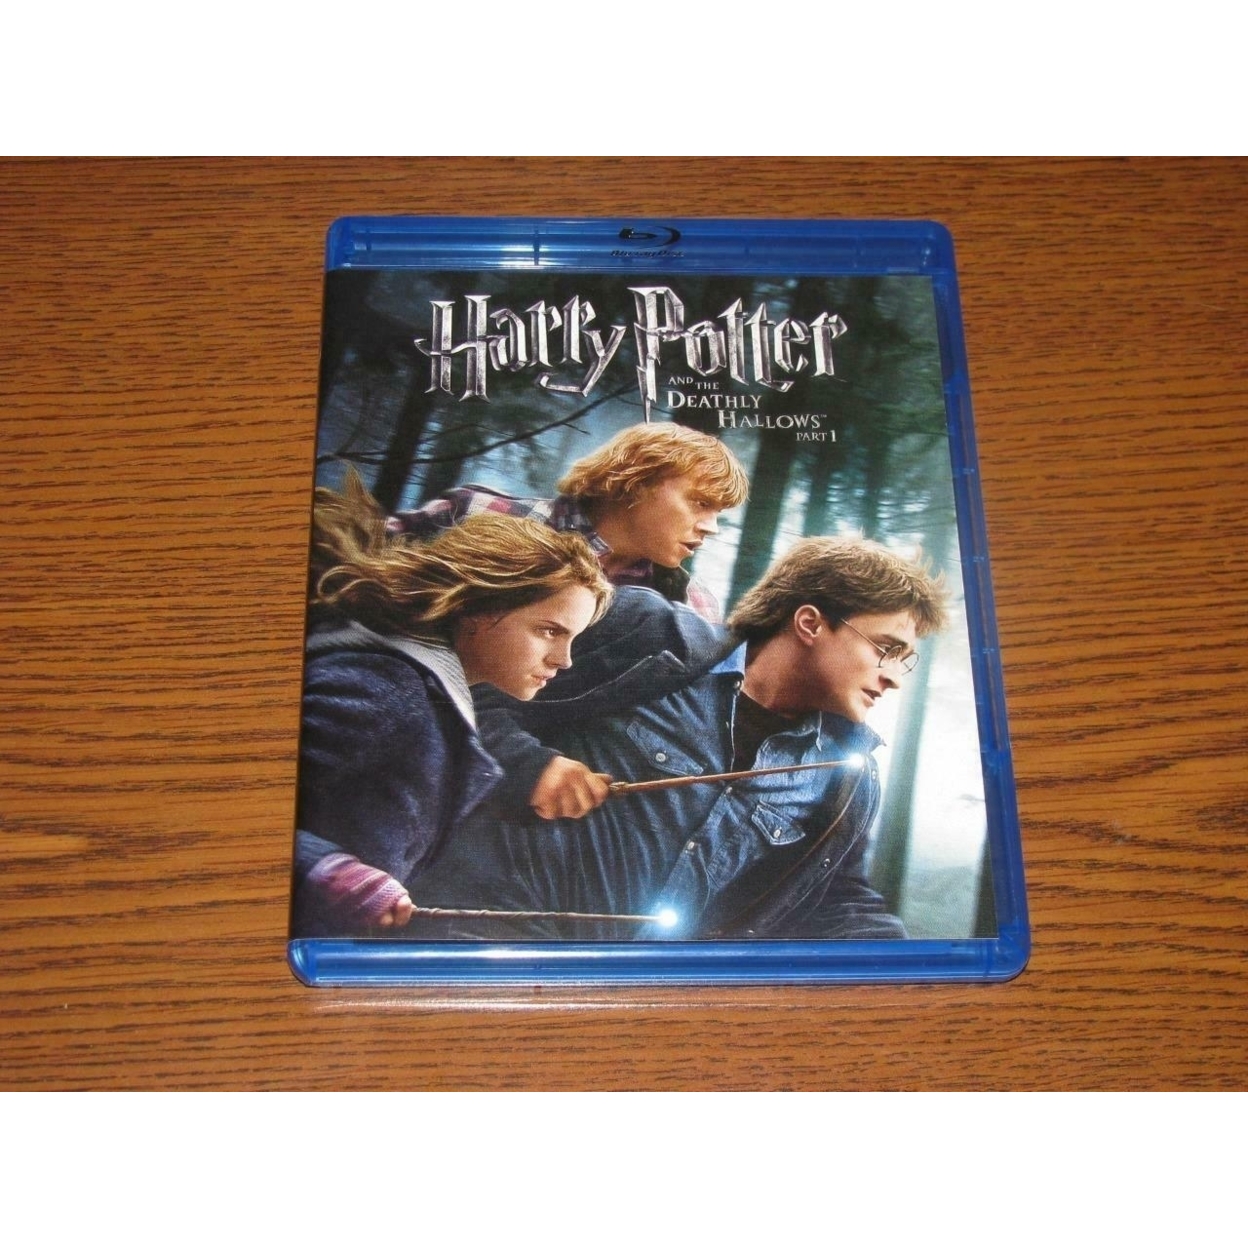 Harry Potter And The Deathly Hallows Part 1 Widescreen (Blu-ray) - image 1 of 3